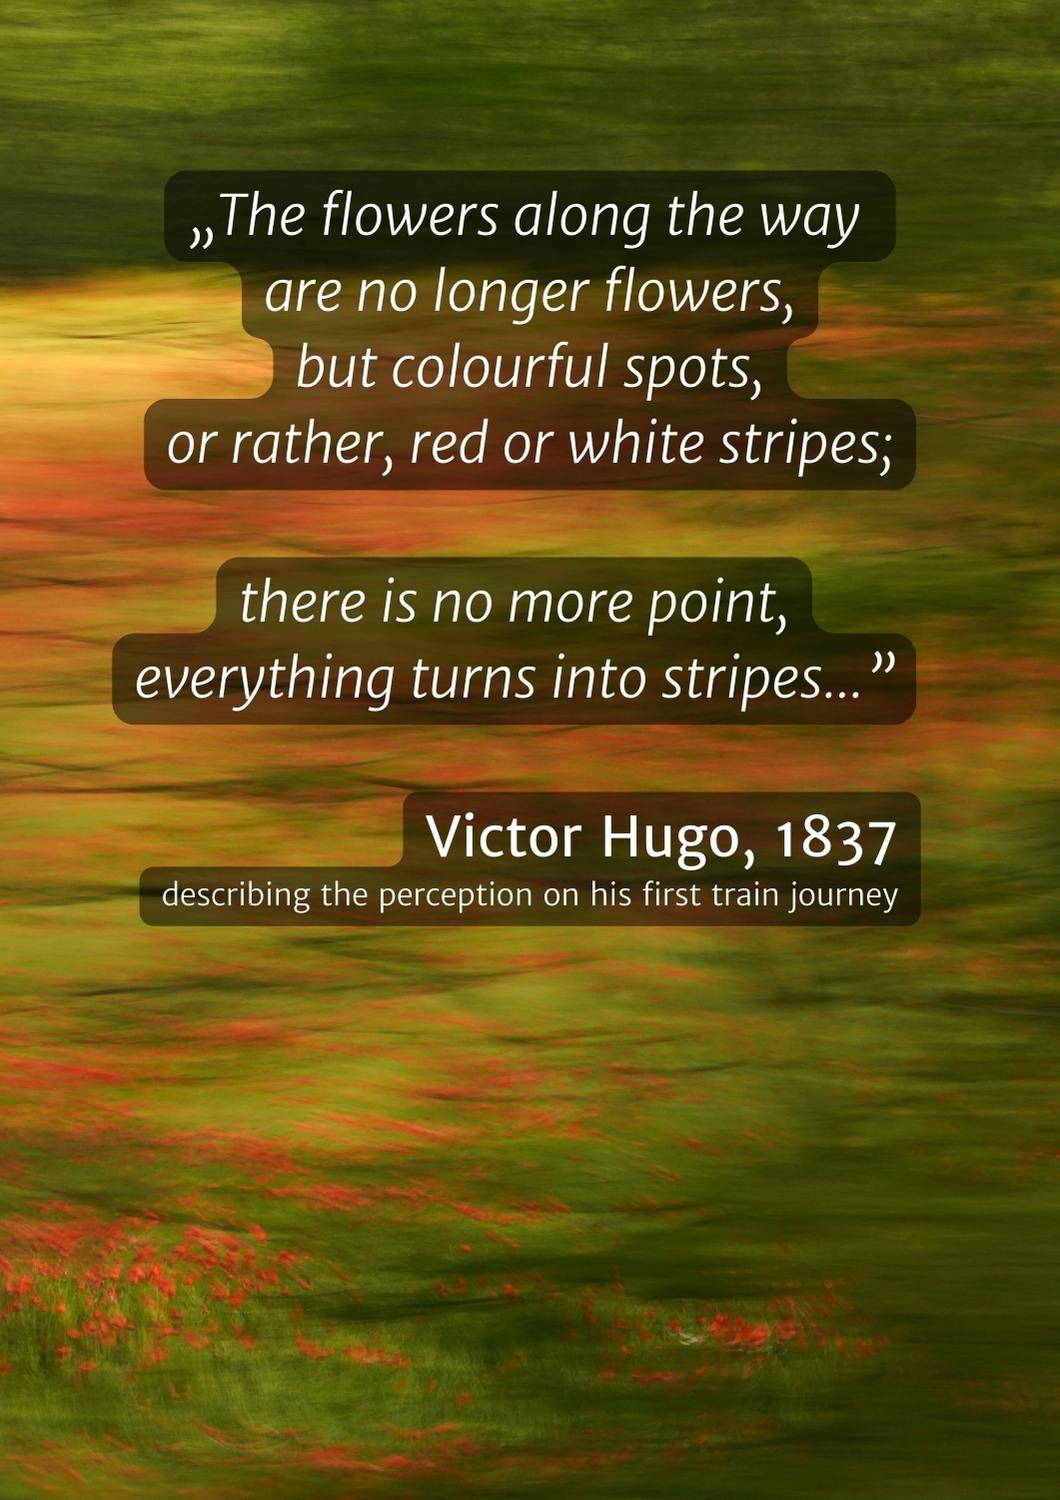 Image representing and artwork of the Travelscape series, inviting companies t invest in art sponsoring. The text reads: „The flowers along the way are no longer flowers, but colourful spots, or rather, red or white stripes; there is no more point, everything turns into stripes...” Victor Hugo, 1837 describing the perception on his first train journey